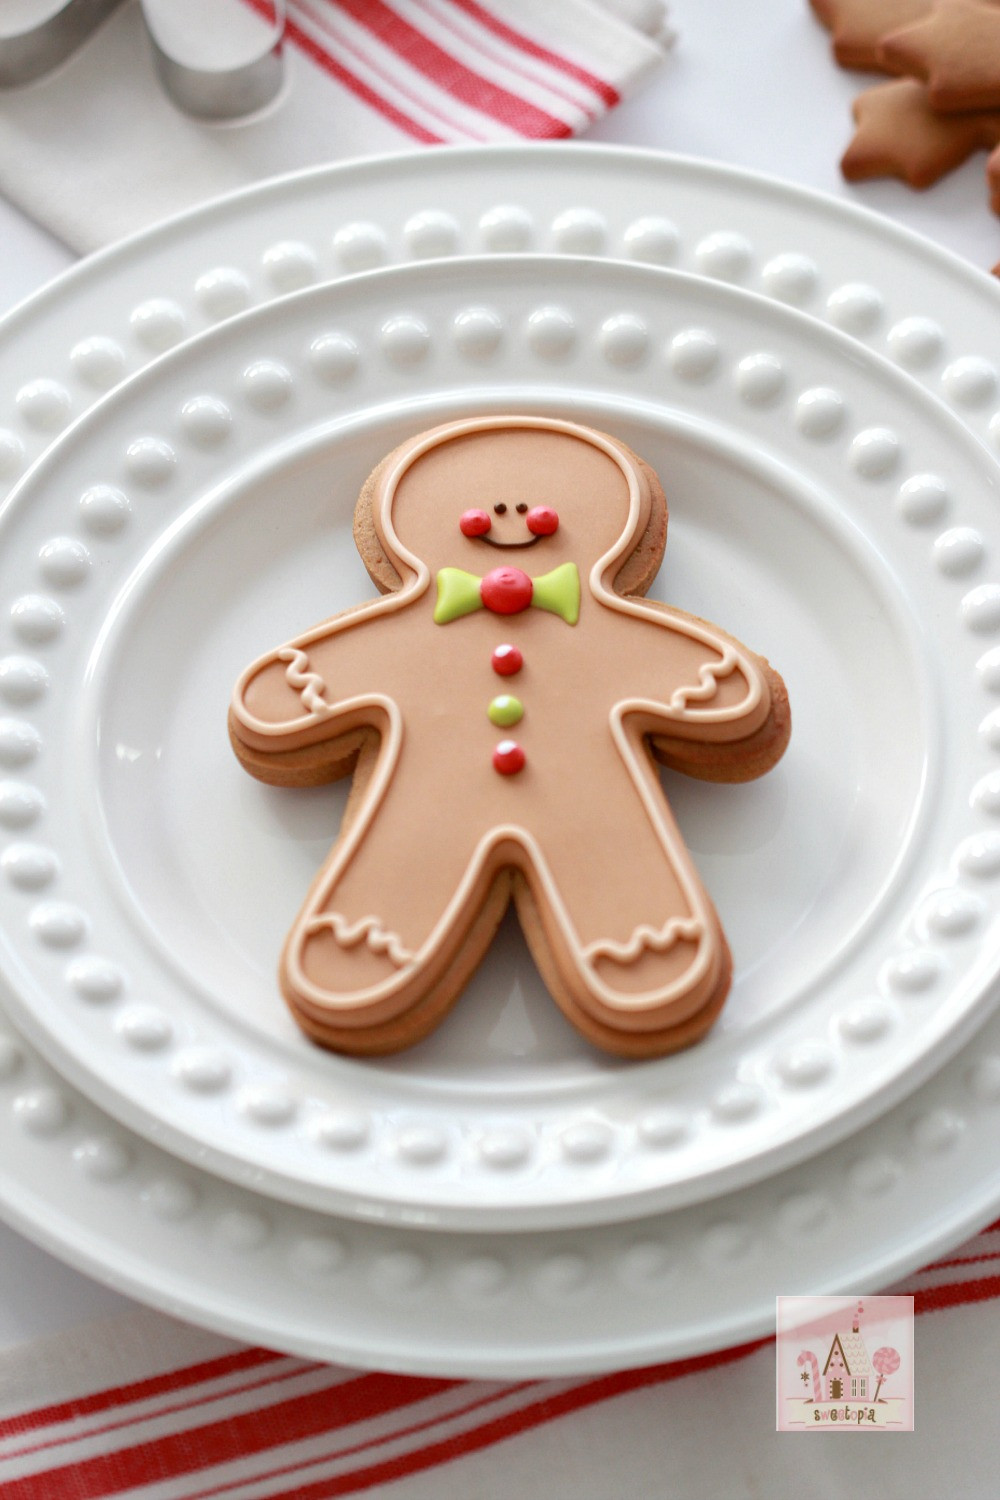 Icing For Gingerbread Cookies
 Video & Recipe How to Make Gingerbread Cut Out Cookies